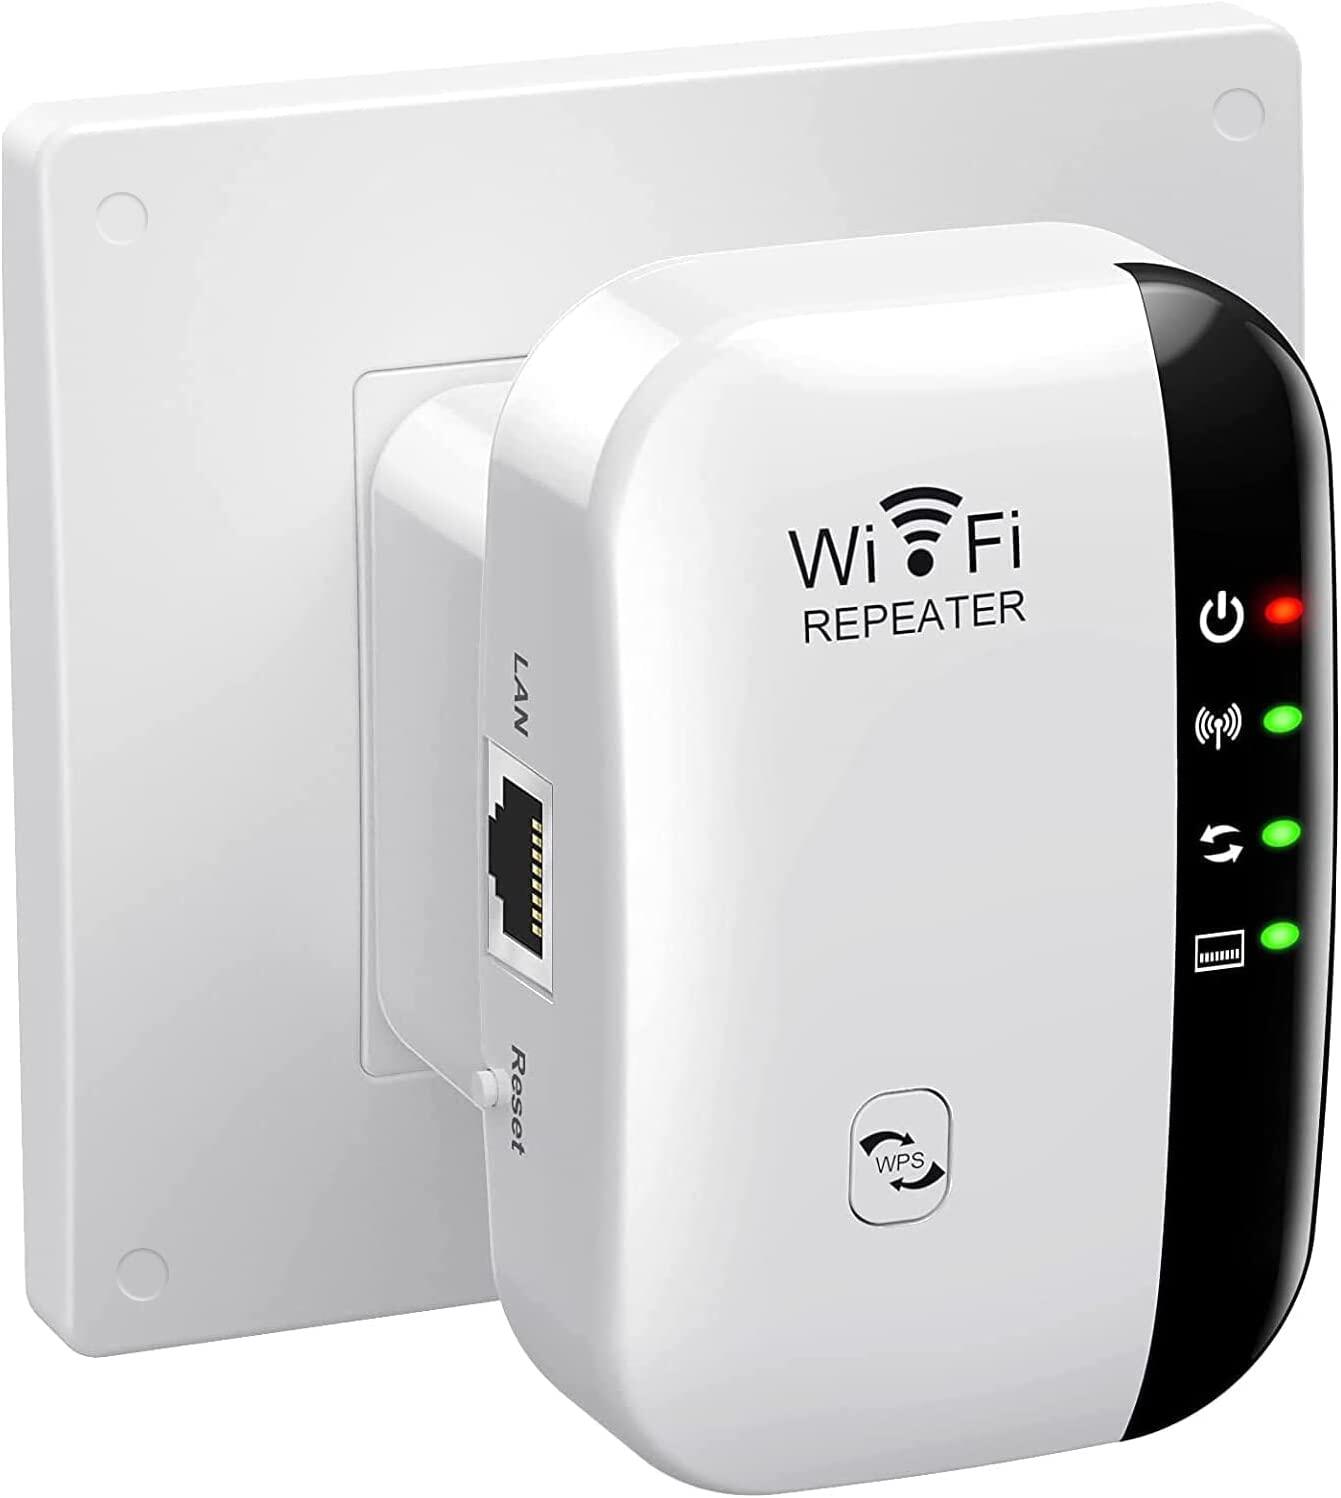 WiFi Range Extender with WPS Internet Signal Booster,300Mbps Wireless Repeater 2.4GHz Amplifier for High Speed Long Range Easily Set Up Supports Repeater/Access Point Mode Extends WiFi to Whole Home & Alexa Devices 